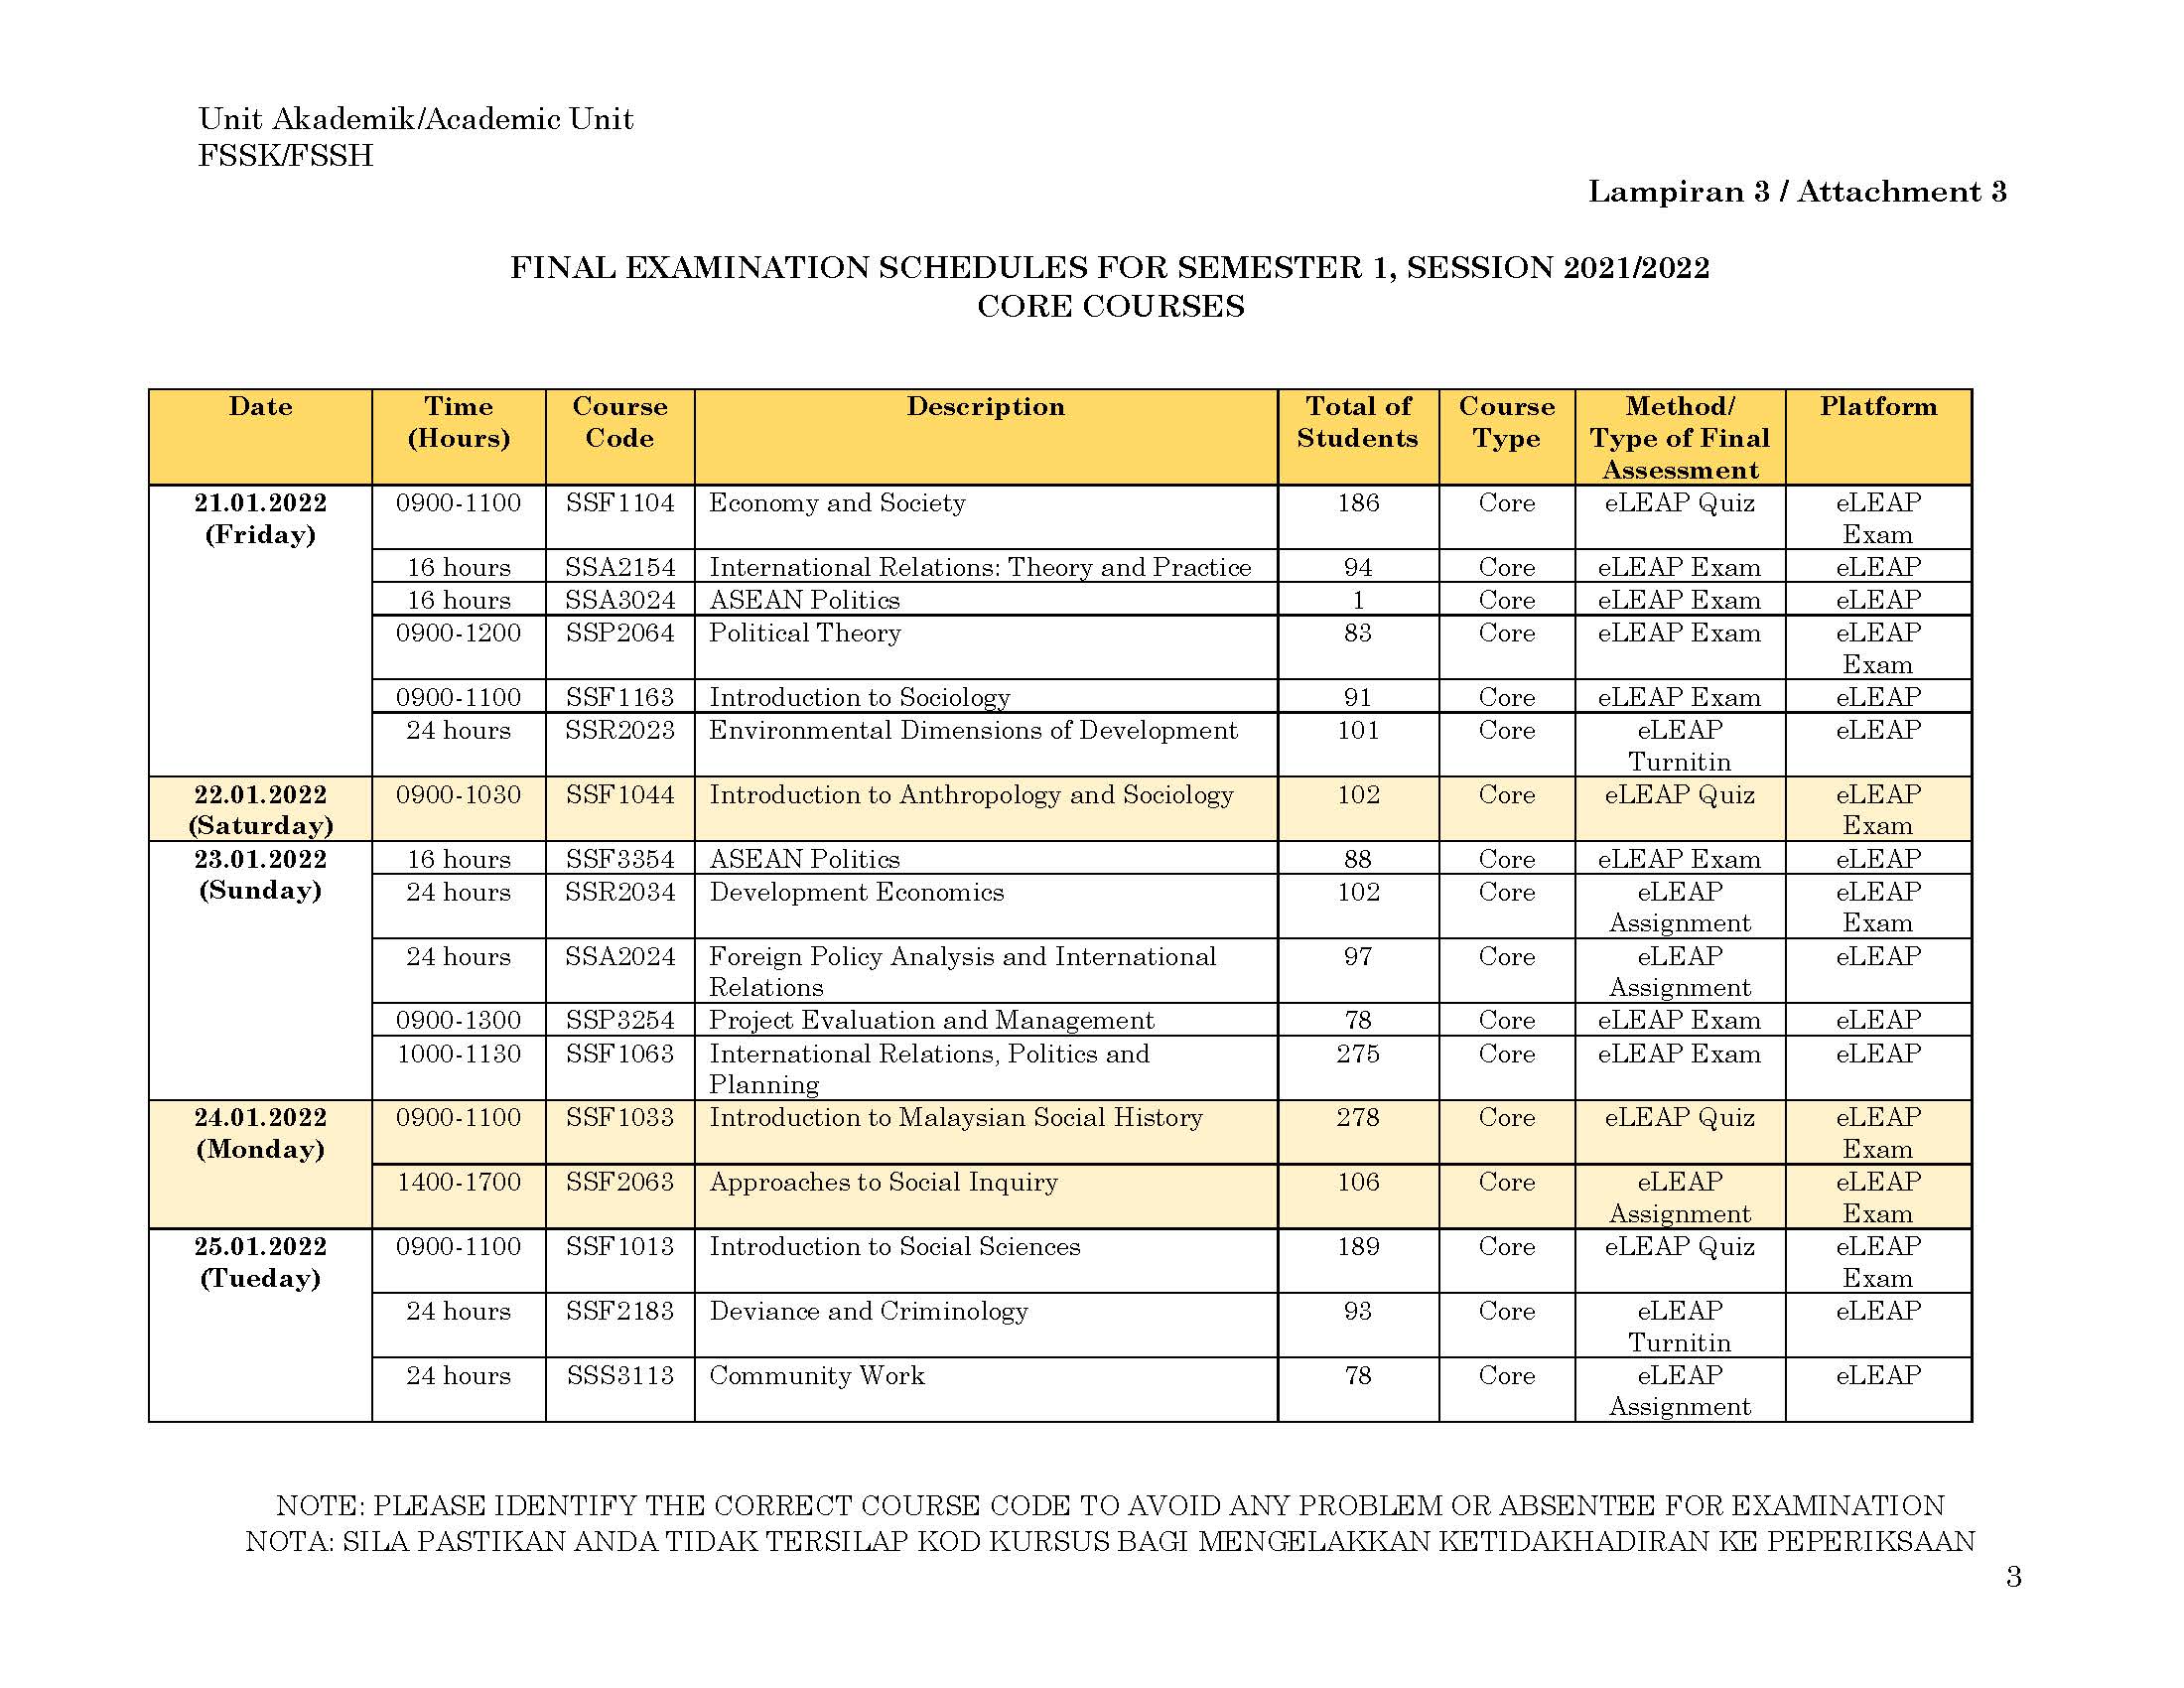 FINAL EXAMINATION SCHEDULES FOR SEMESTER 1 SESSION 2021 2022 2 Page 4